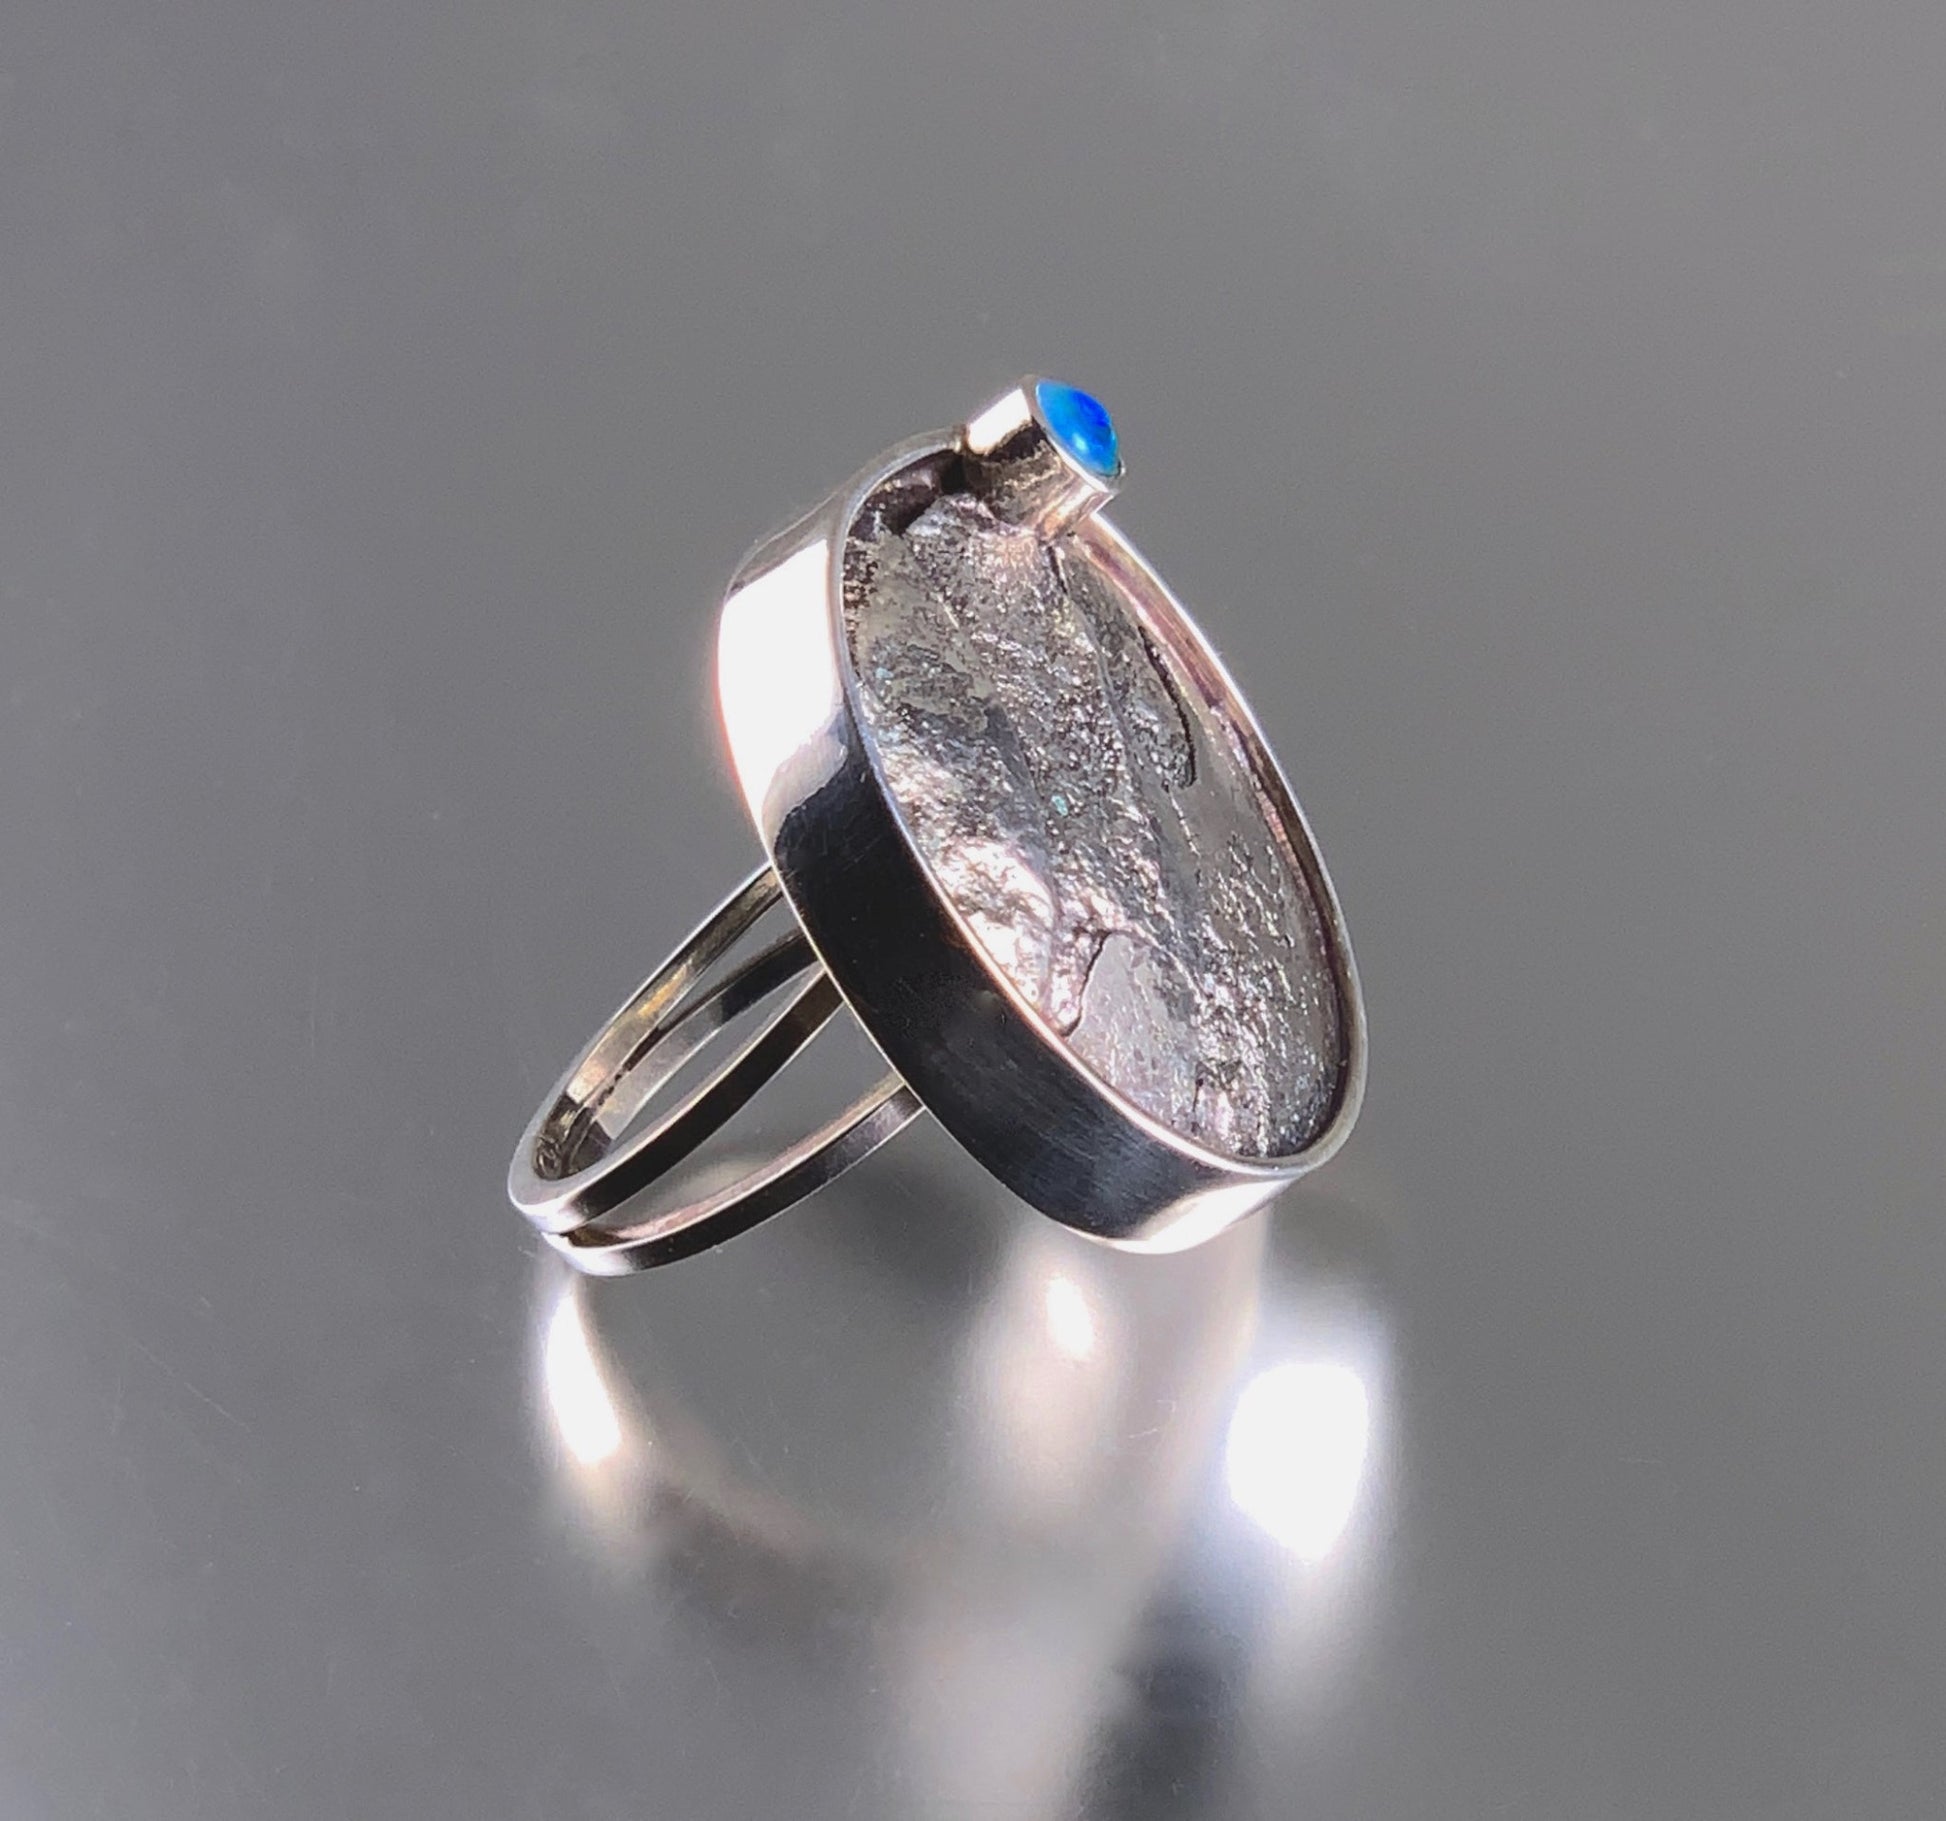 statement ring of sterling silver with texture, patina and opal